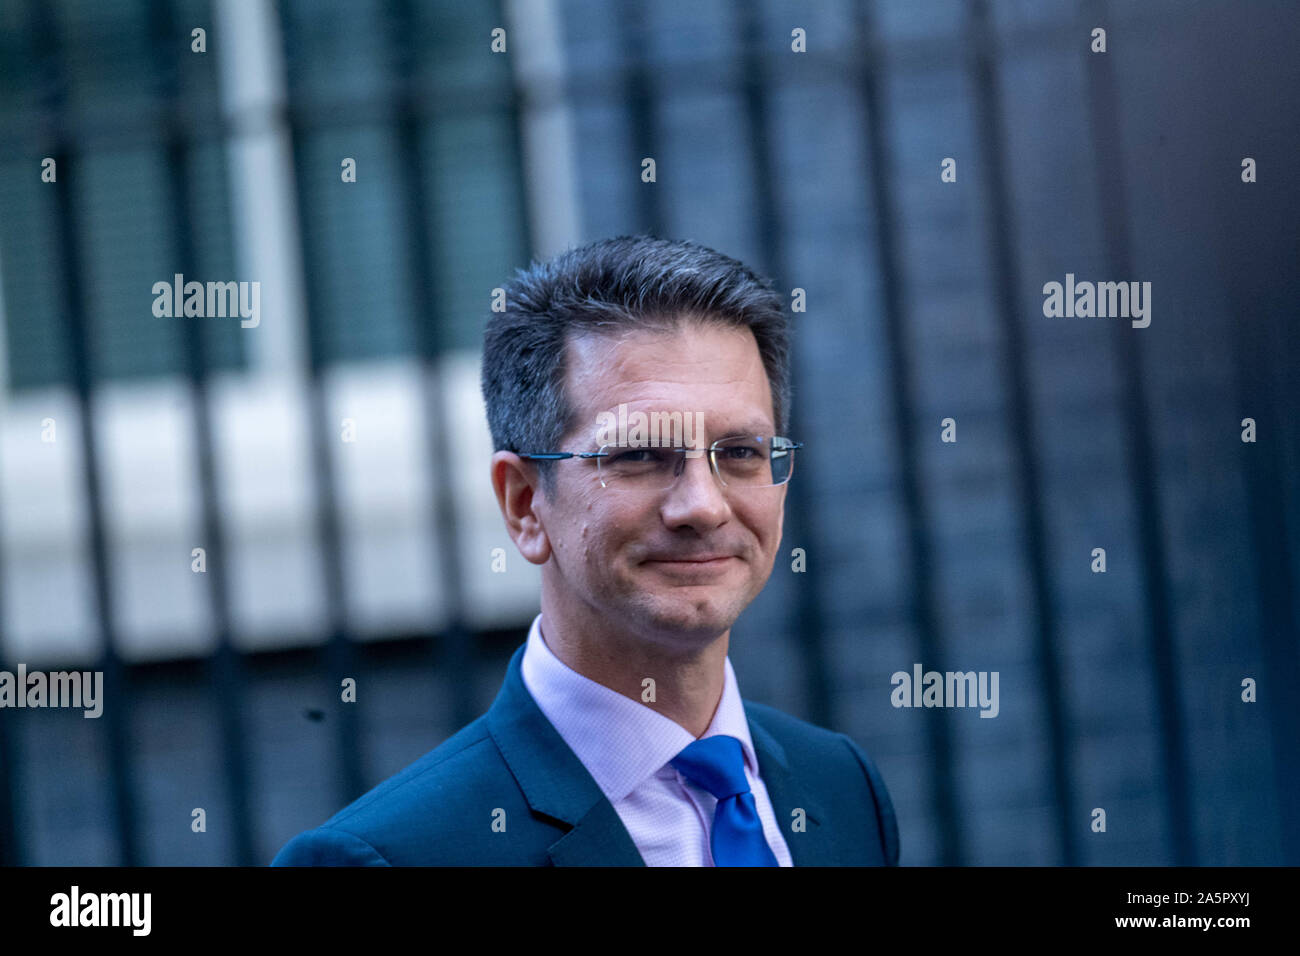 London, UK. 22nd Oct, 2019. Steven Baker MP, Chair of the European Research Group leaves a meeting at 10 Downing Street, London Credit: Ian Davidson/Alamy Live News Stock Photo